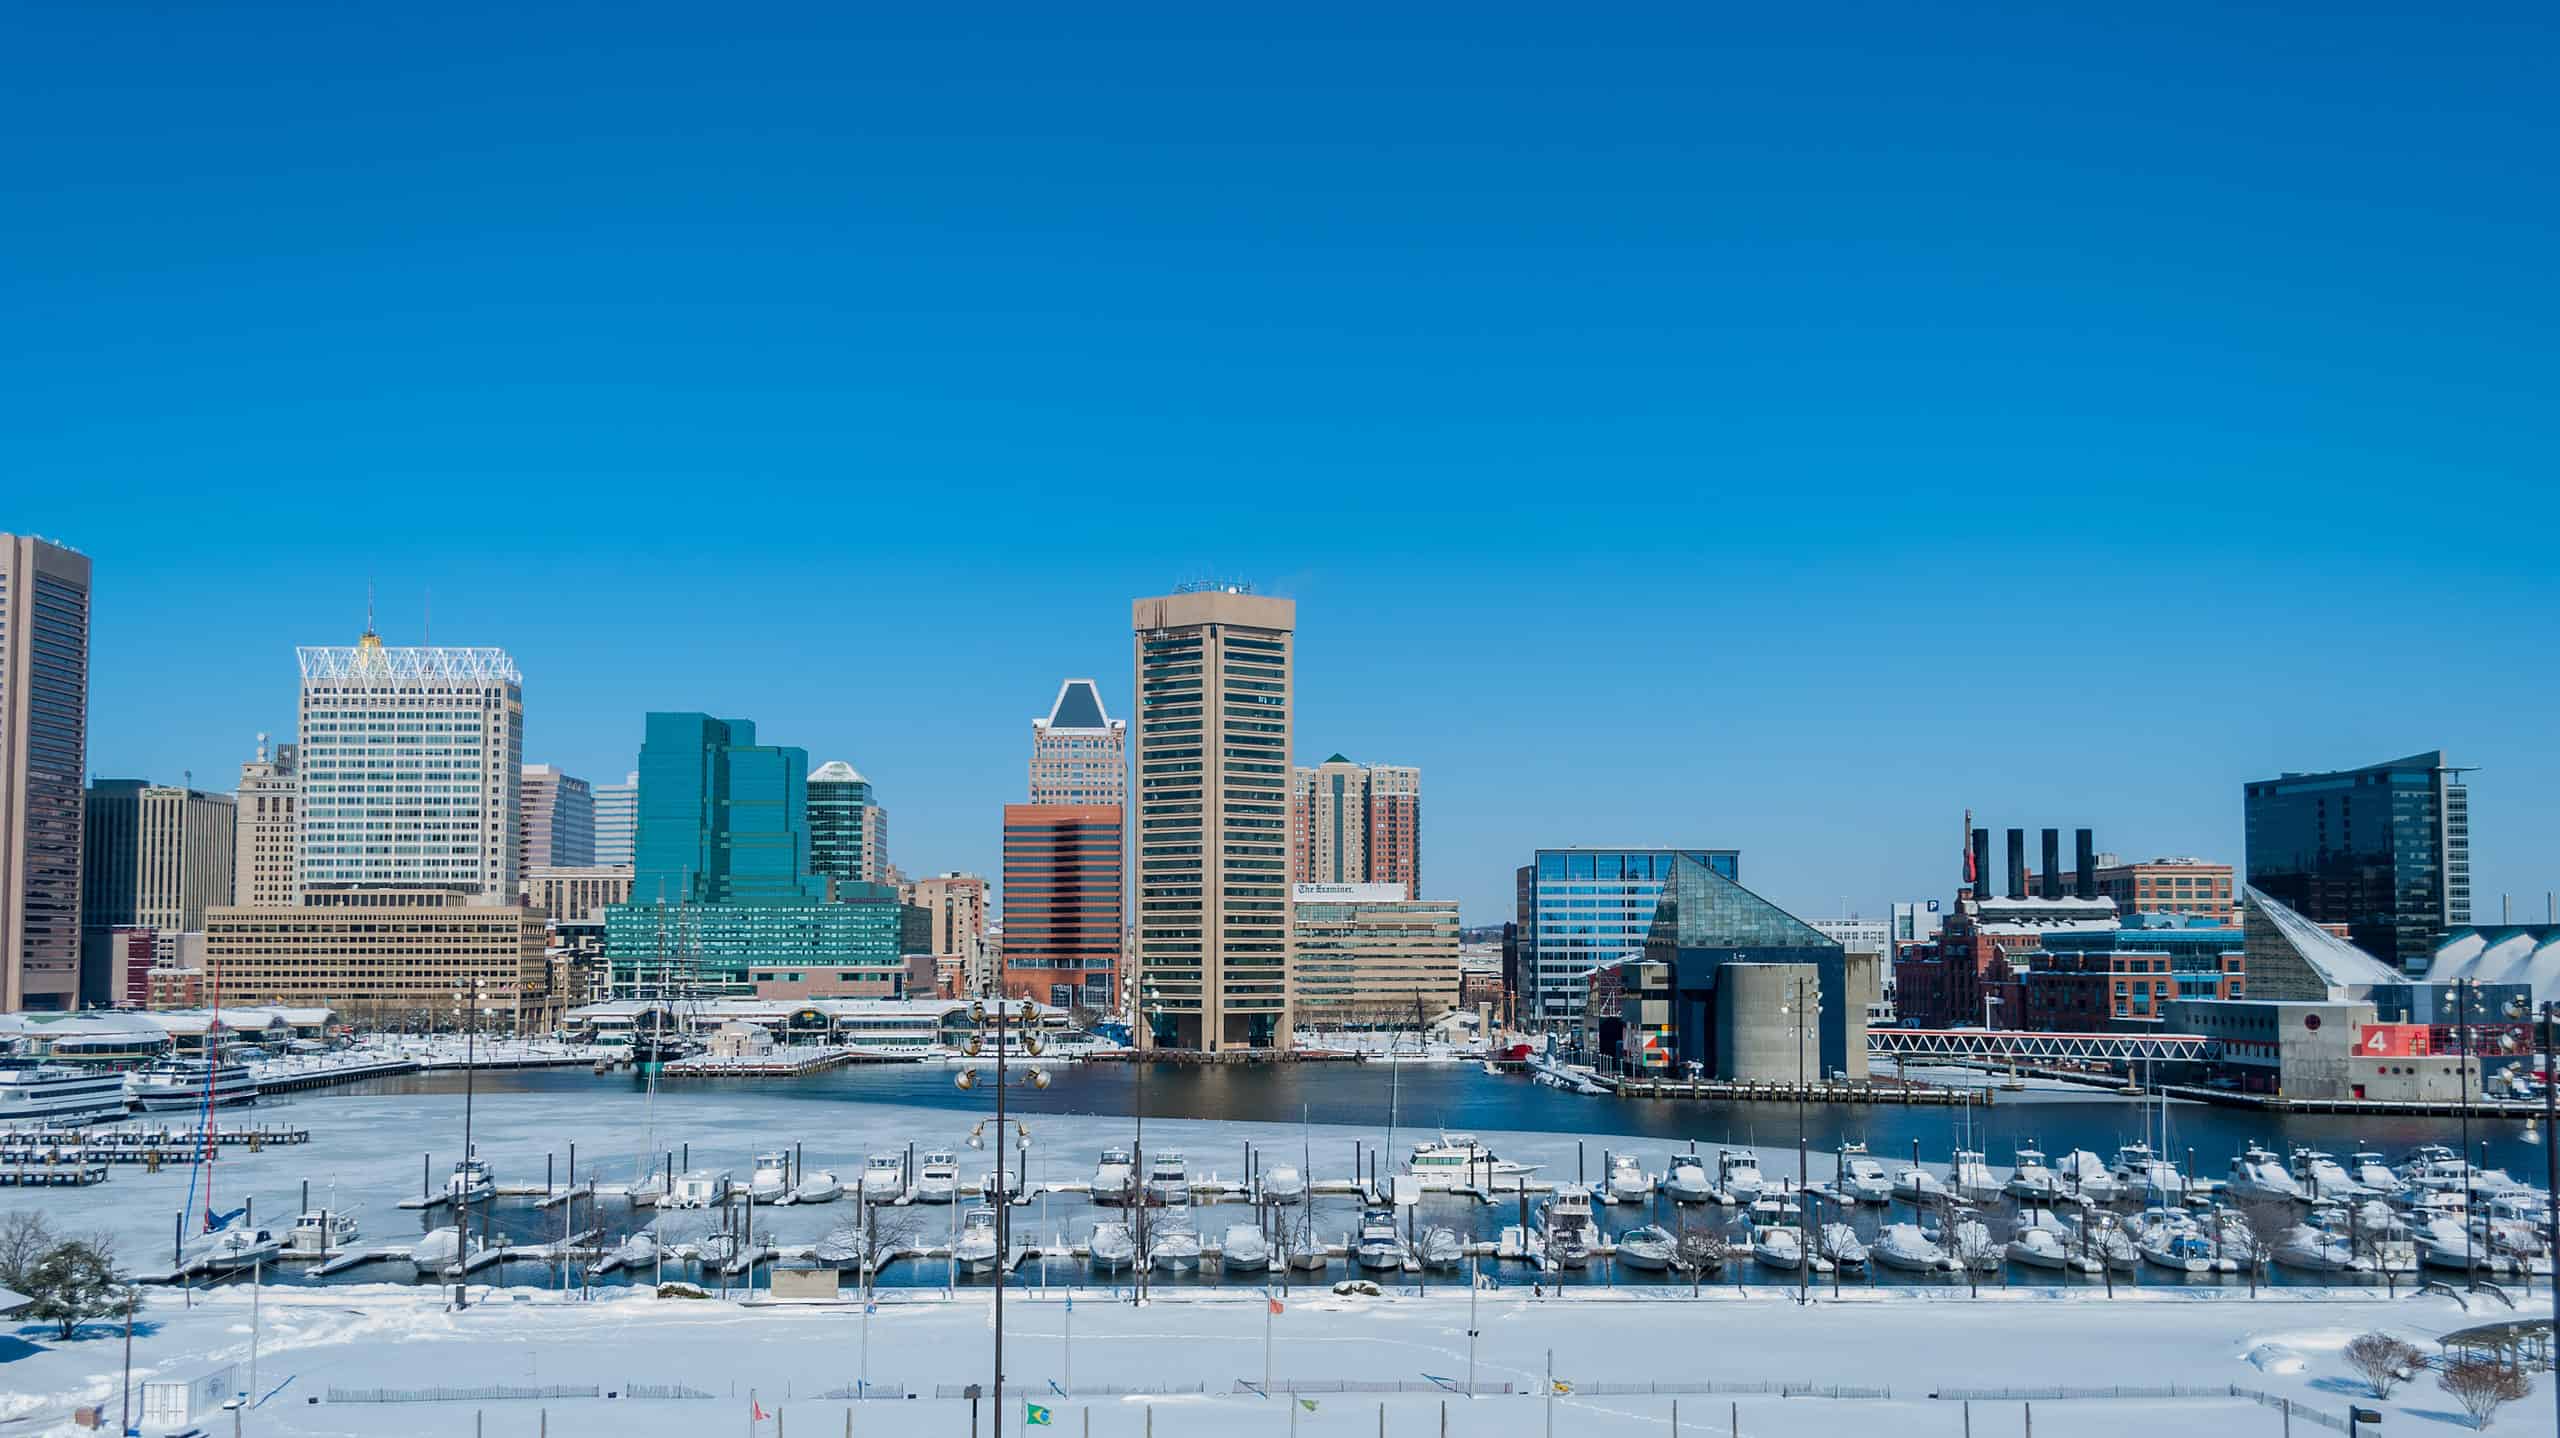 Baltimore Maryland harbor in the snow